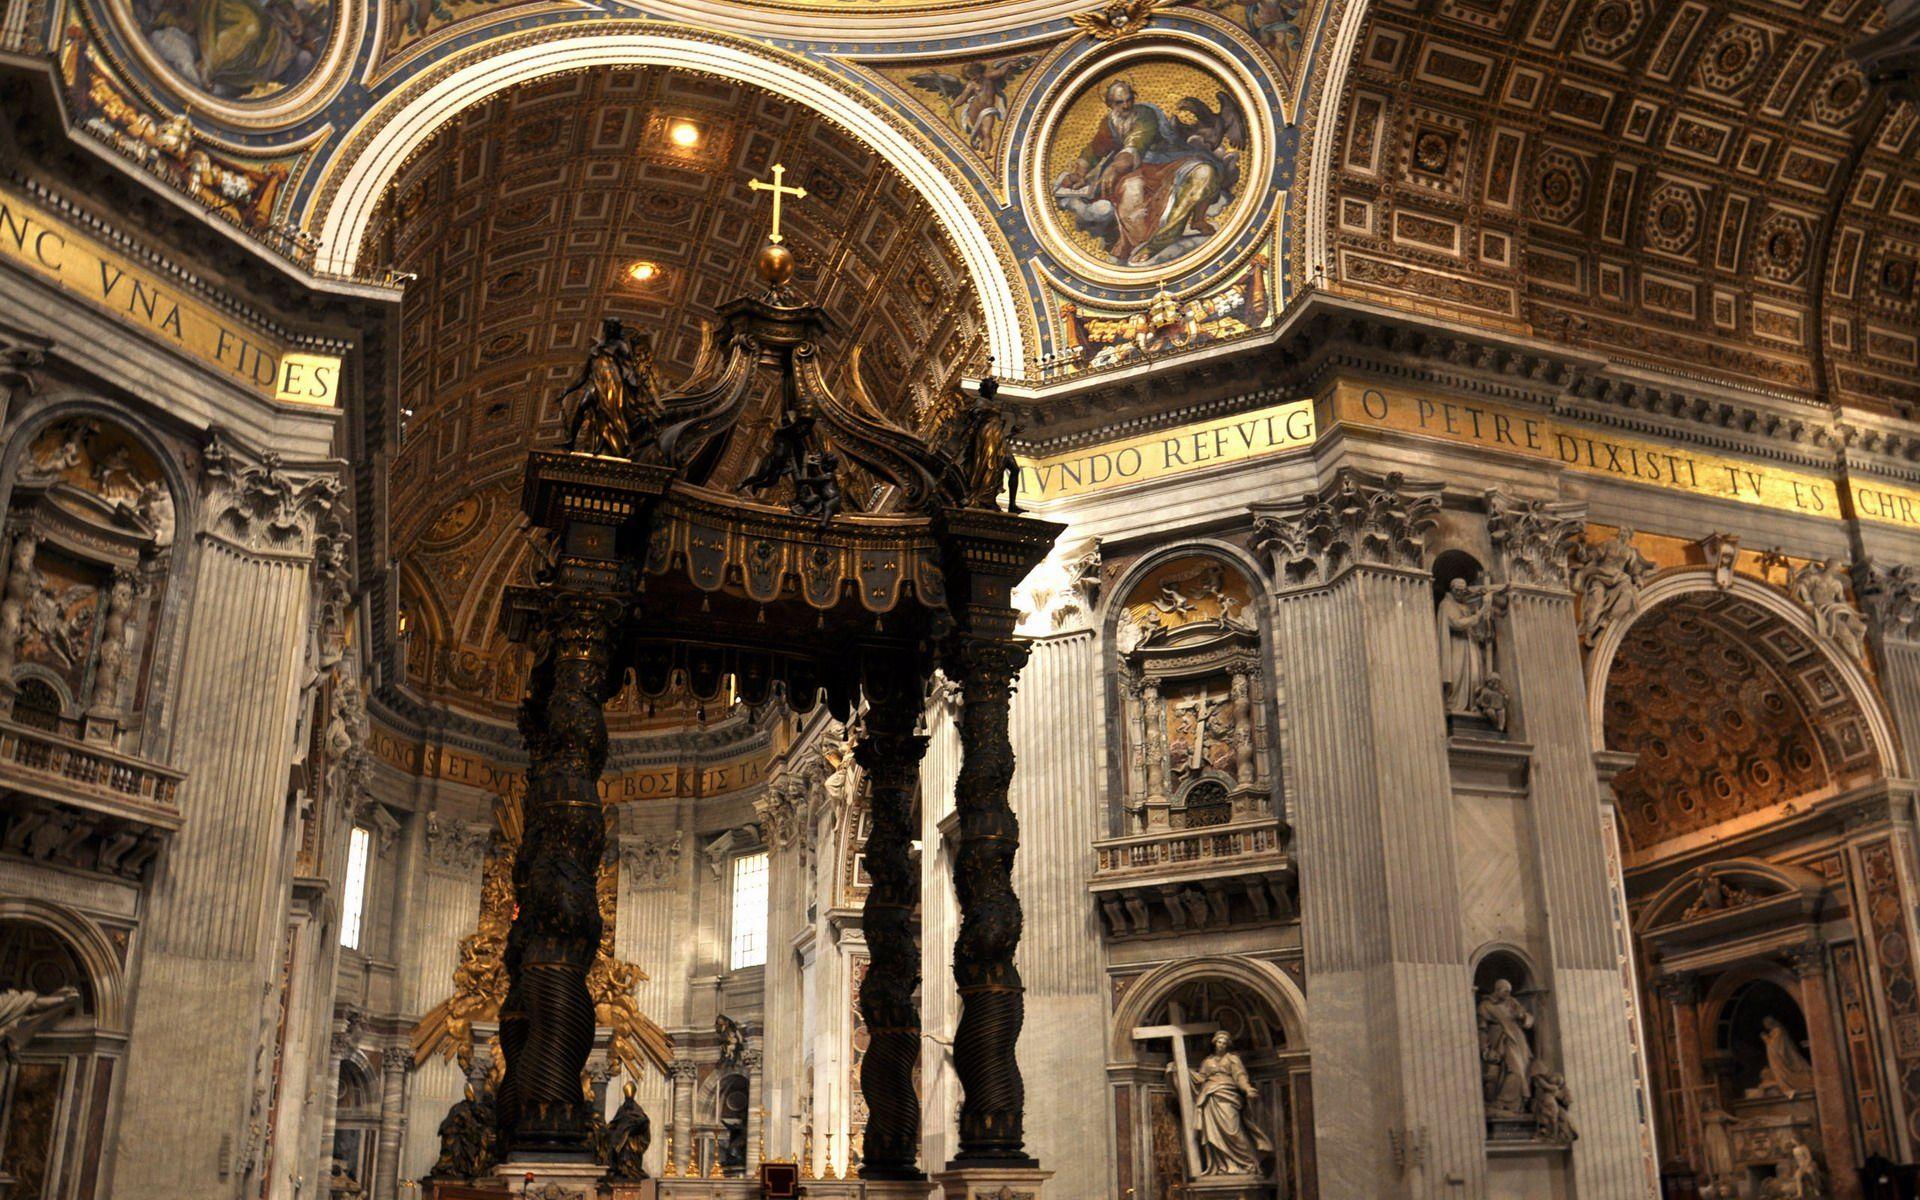 St Peter's Basilica. Crosses, Cathedrals and Churches